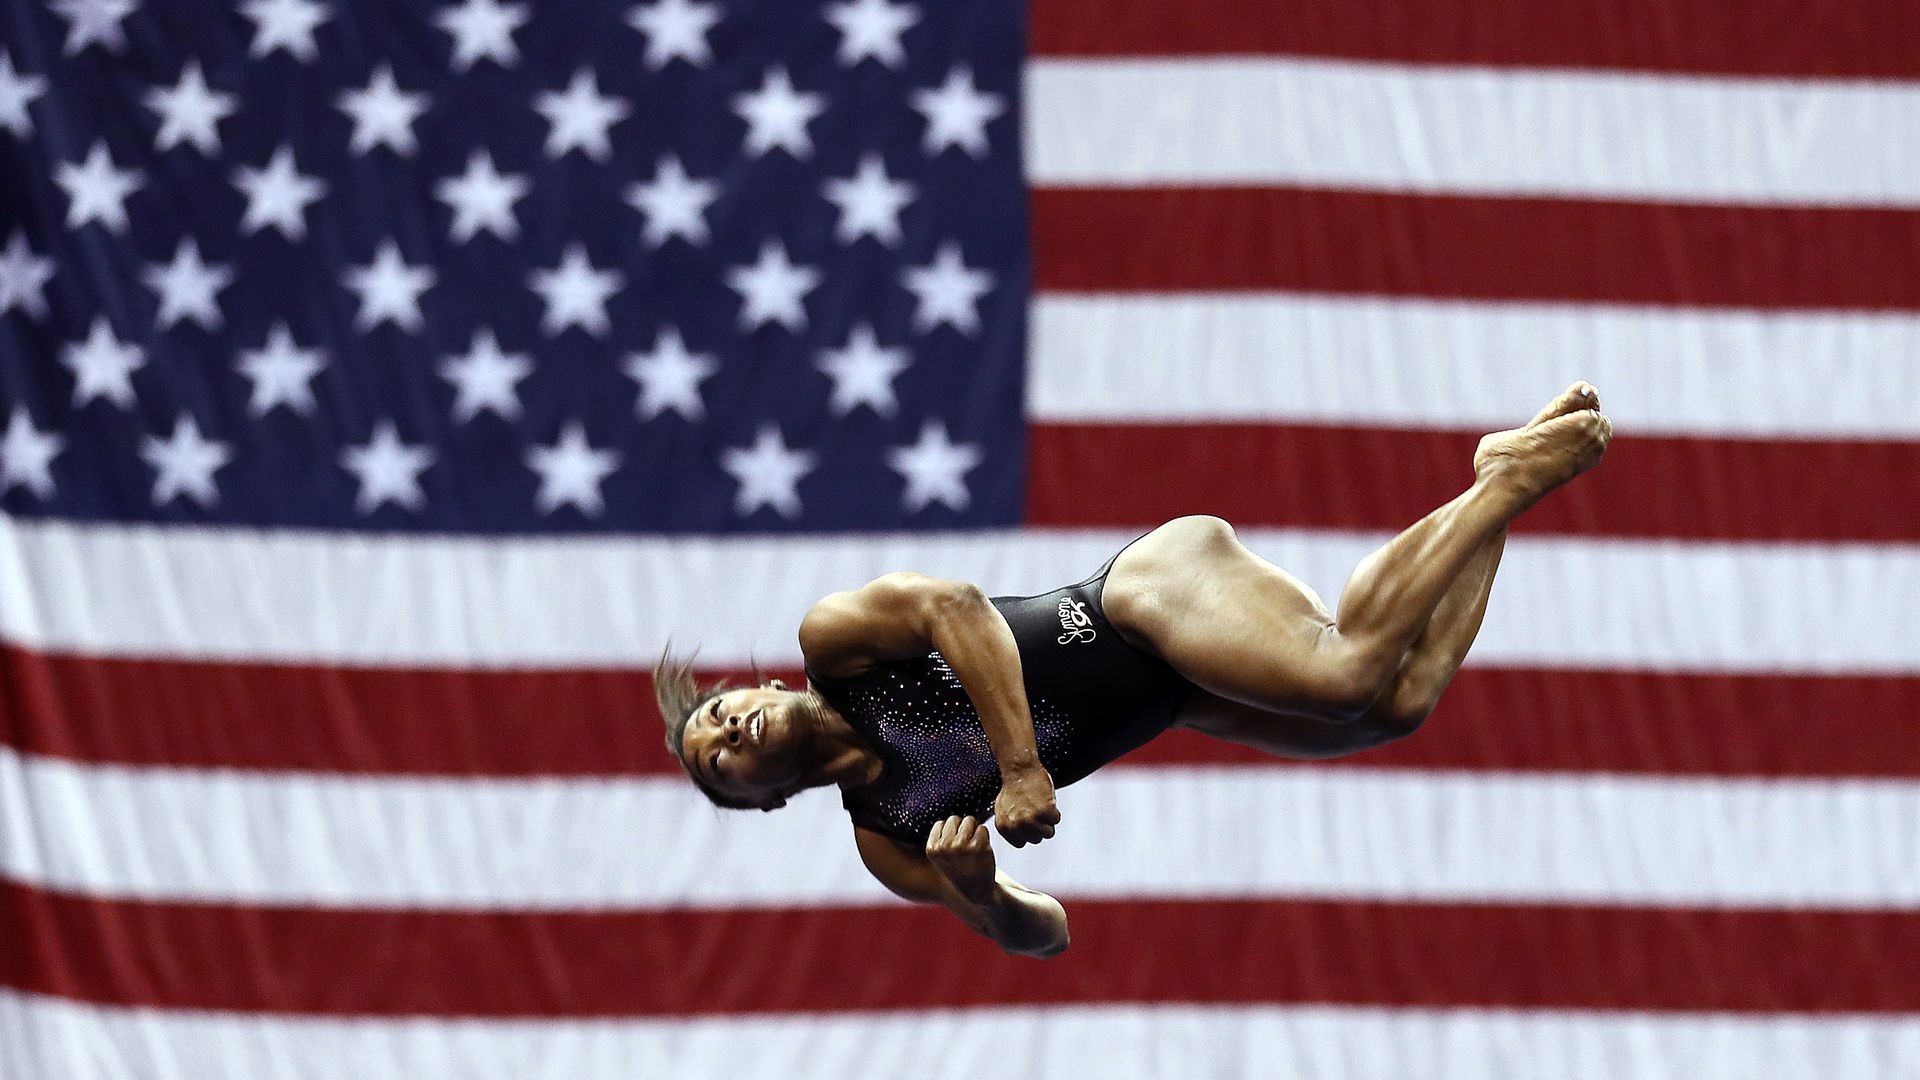 Simone Biles warms up prior to the Women's Senior competition of the 2019 U.S. Gymnastics Championships at the Sprint Center on August 11, 2019 in Kansas City